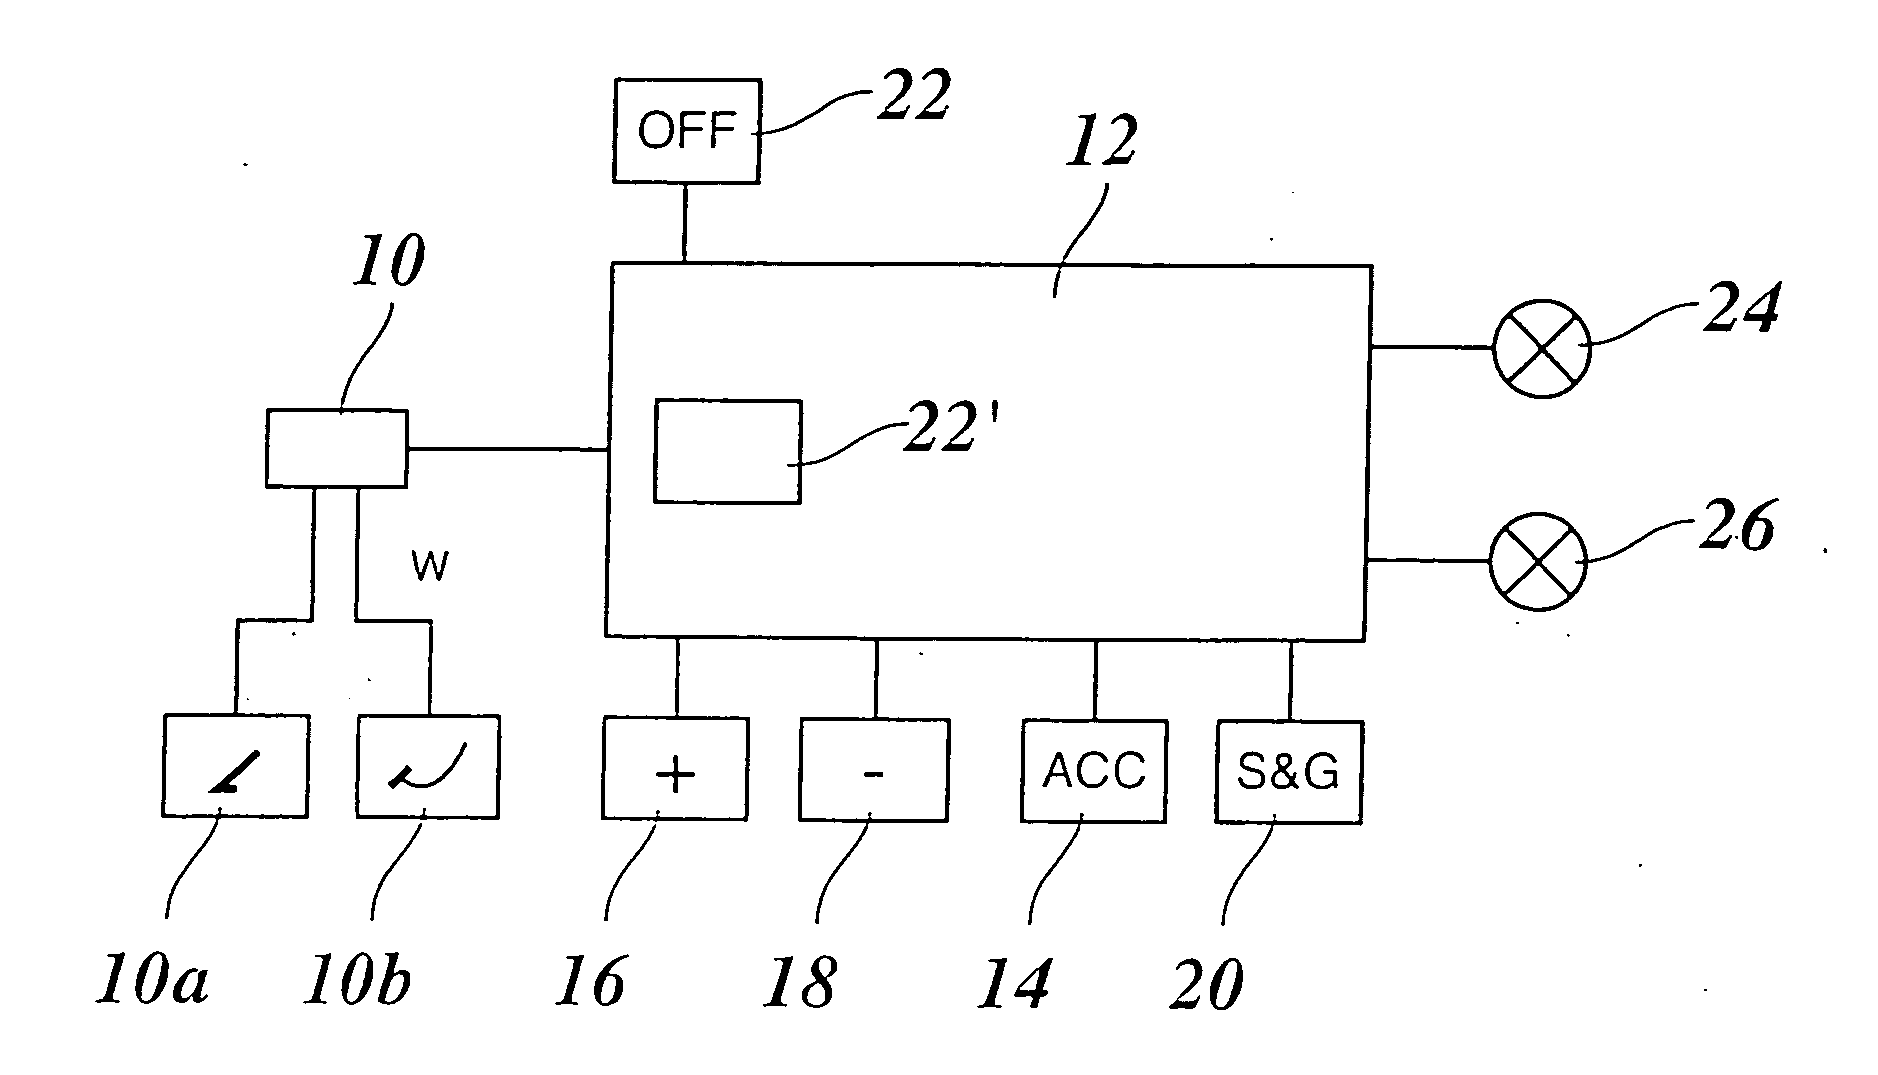 Cruise Control System For Motor Vehicles Having An Automatic Shutoff System